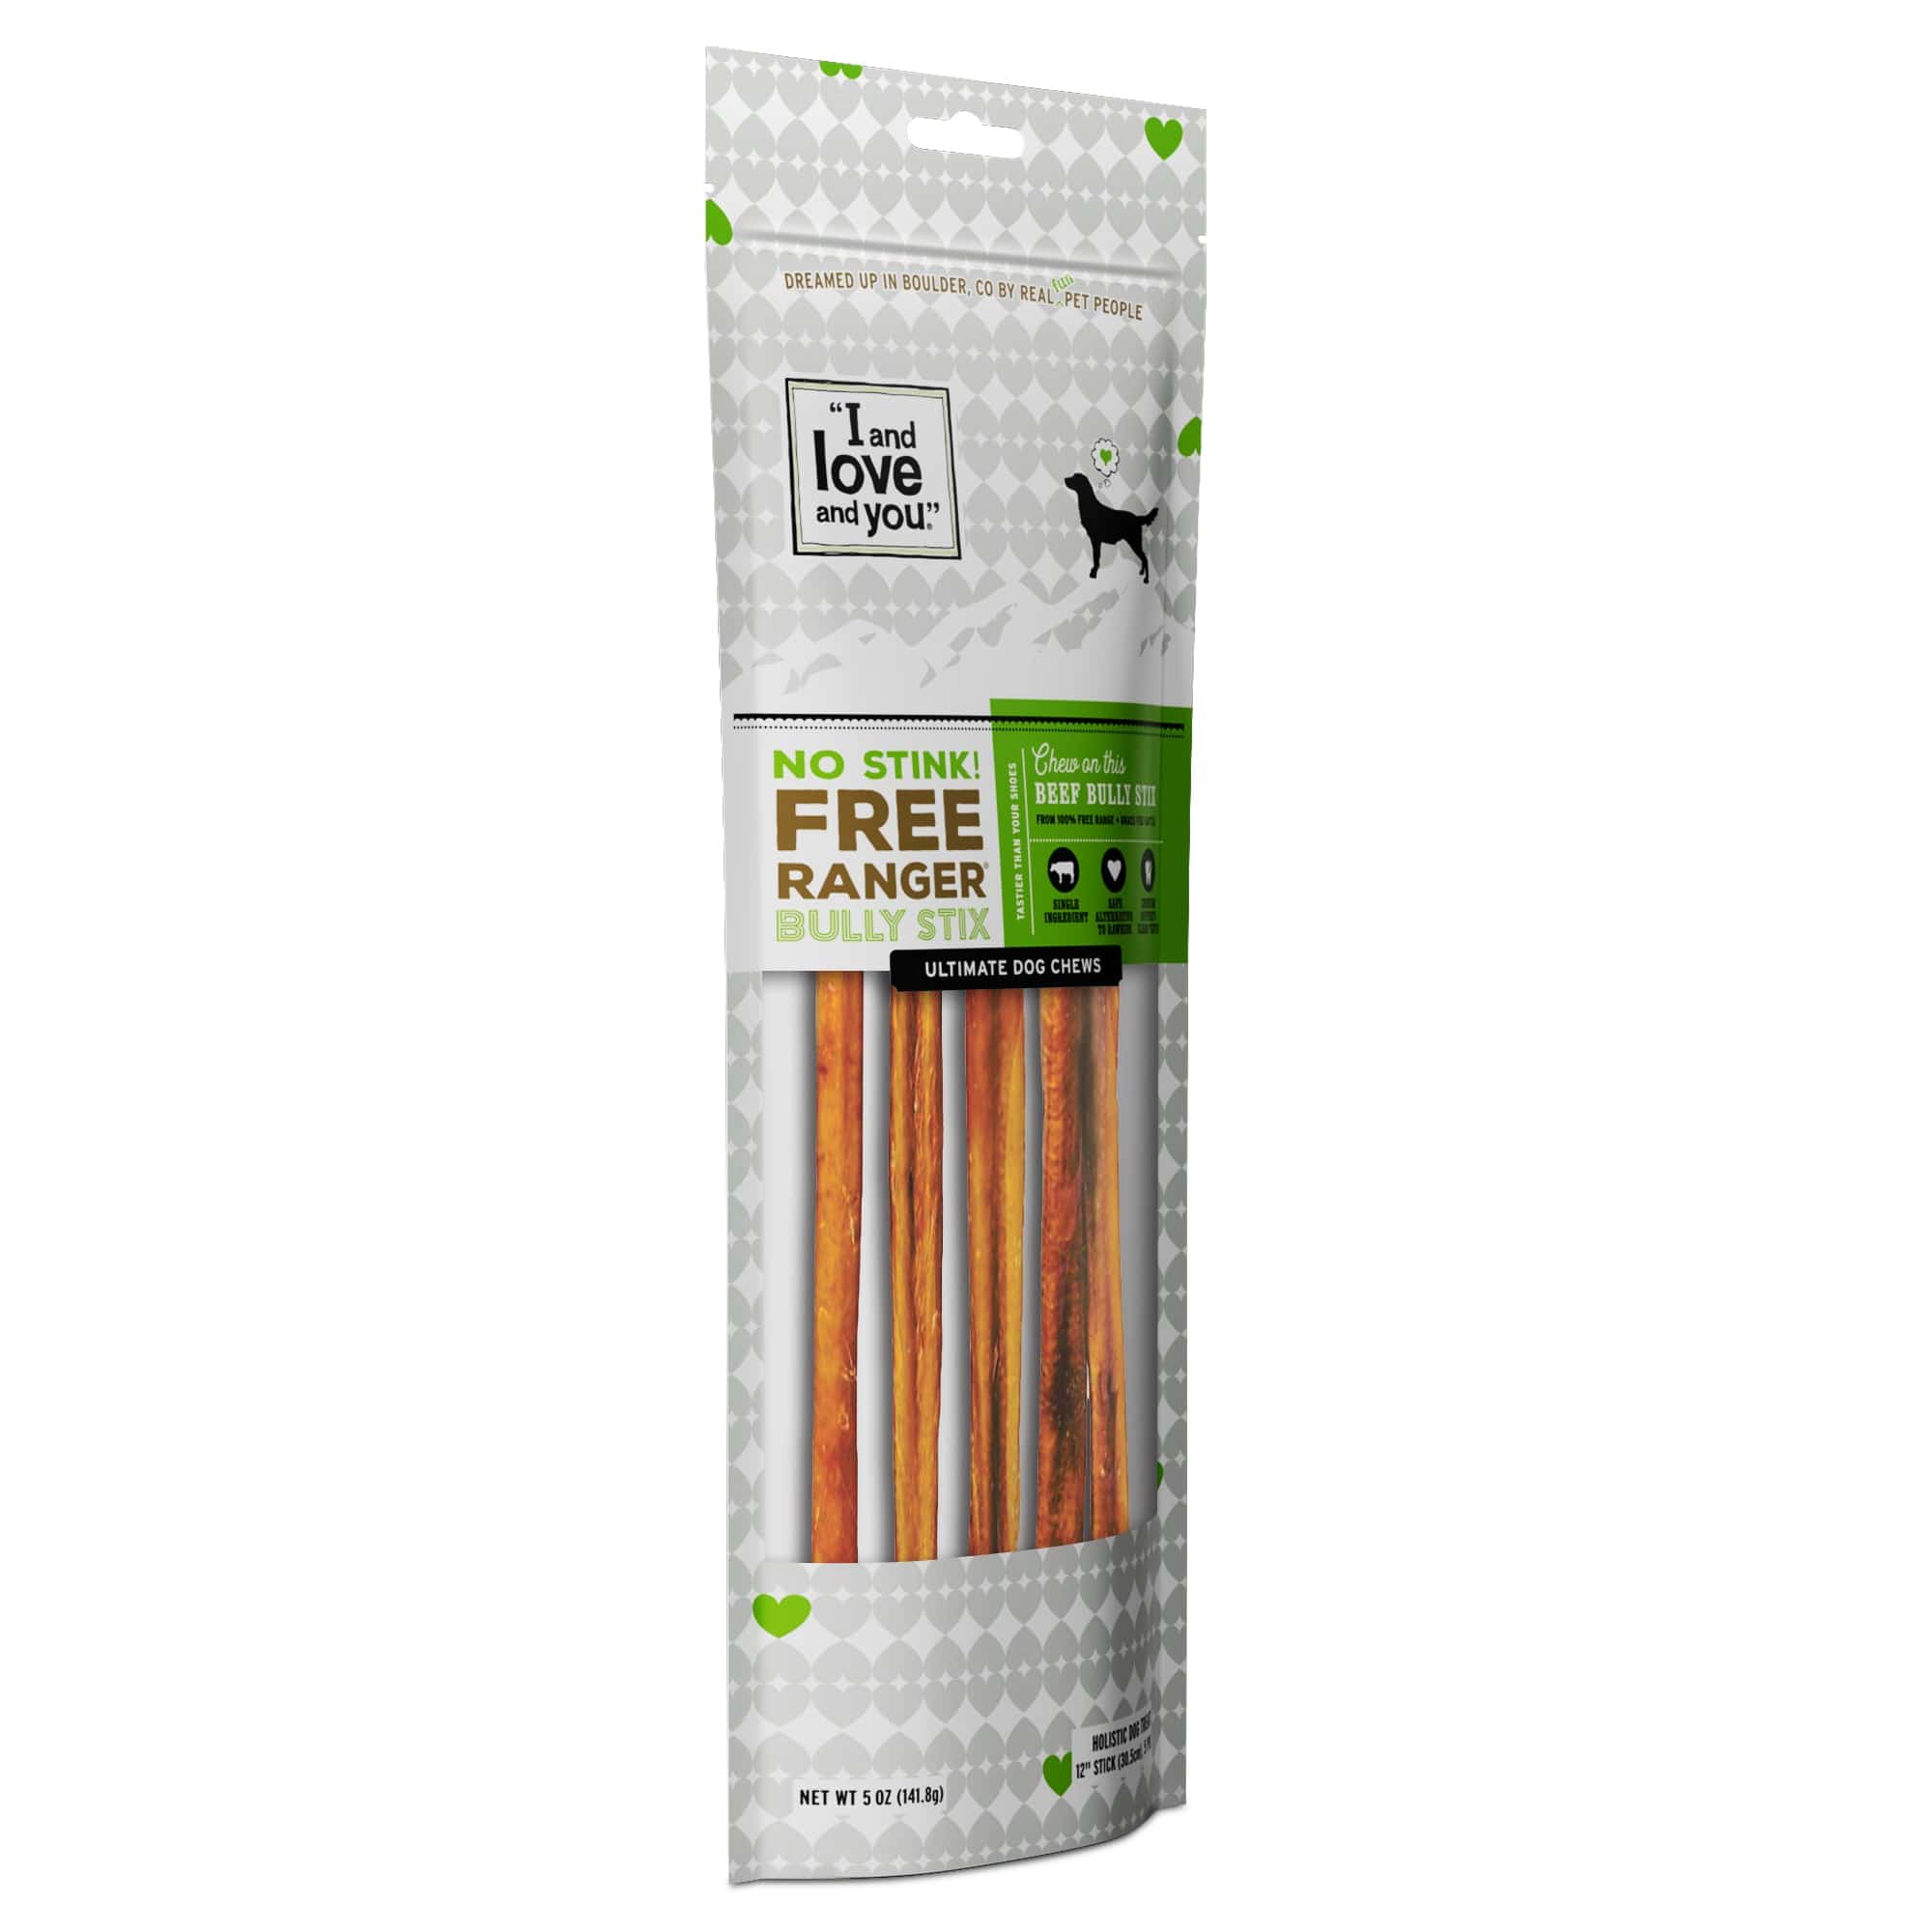 No Stink! Free Ranger Bully Stix 12 package with dog treats, chews, and sticks. Package side view.